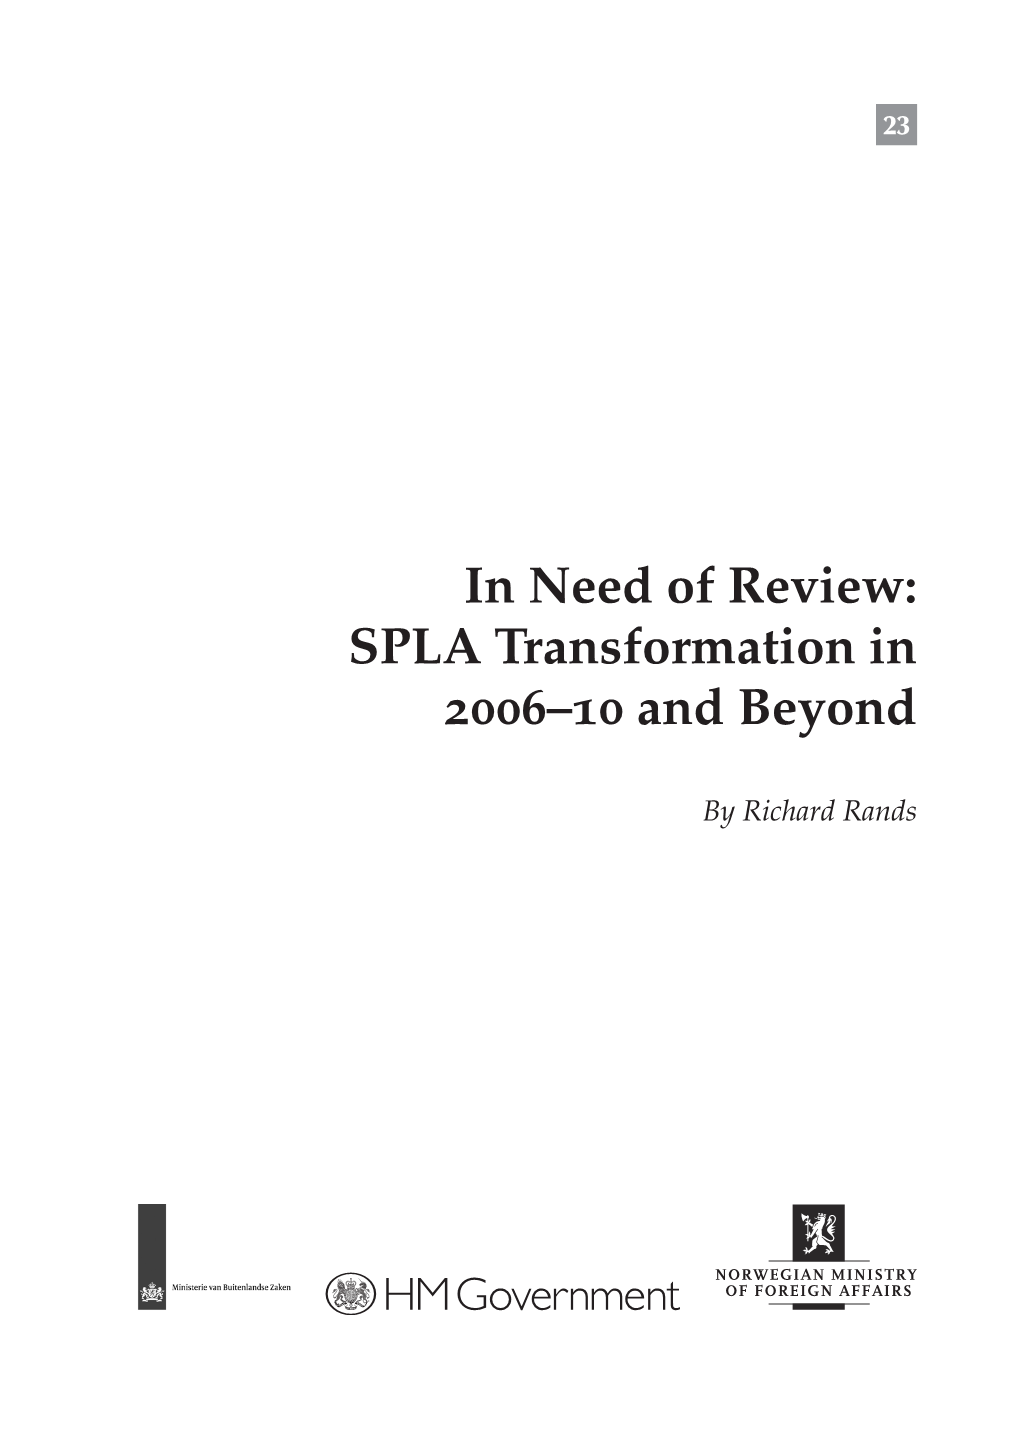 SPLA Transformation in 2006–10 and Beyond